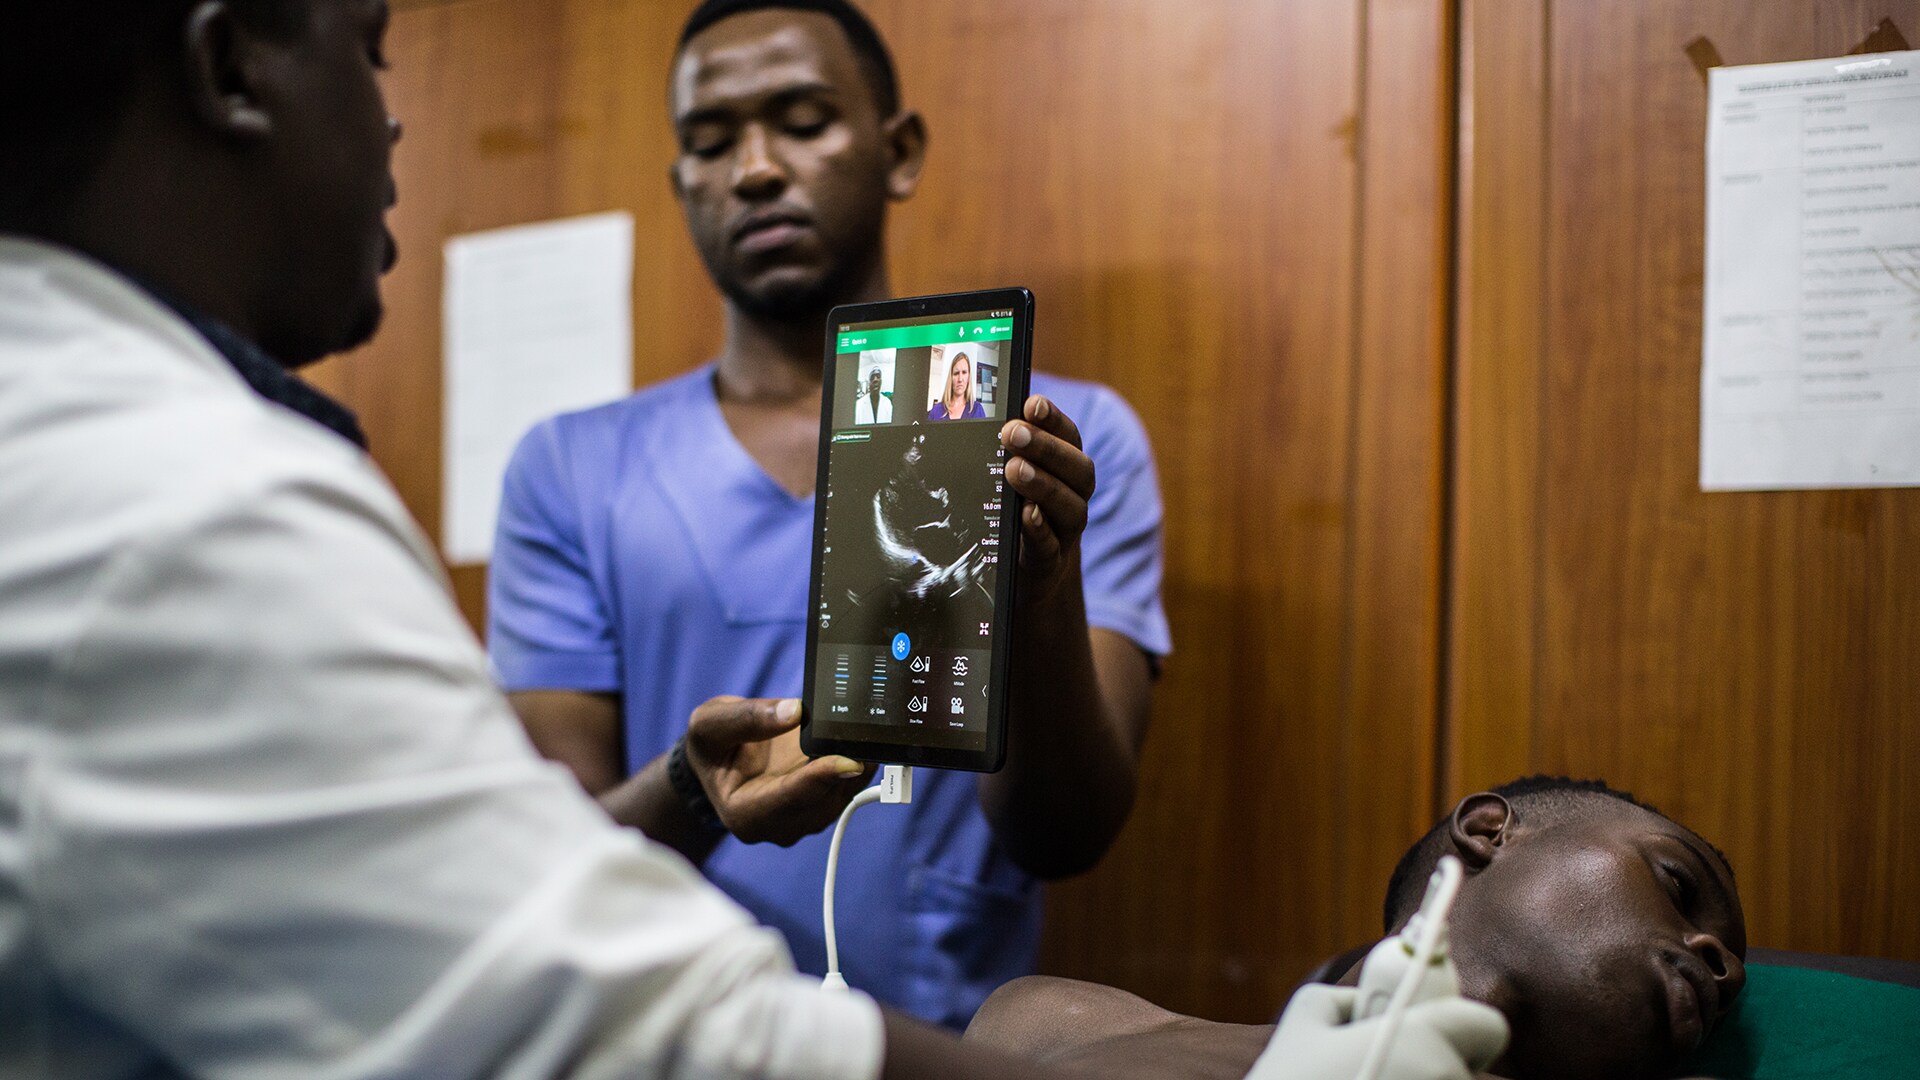 Philips teams up with PURE on pioneering tele-ultrasound program linking specialists around the globe with physicians in Rwanda